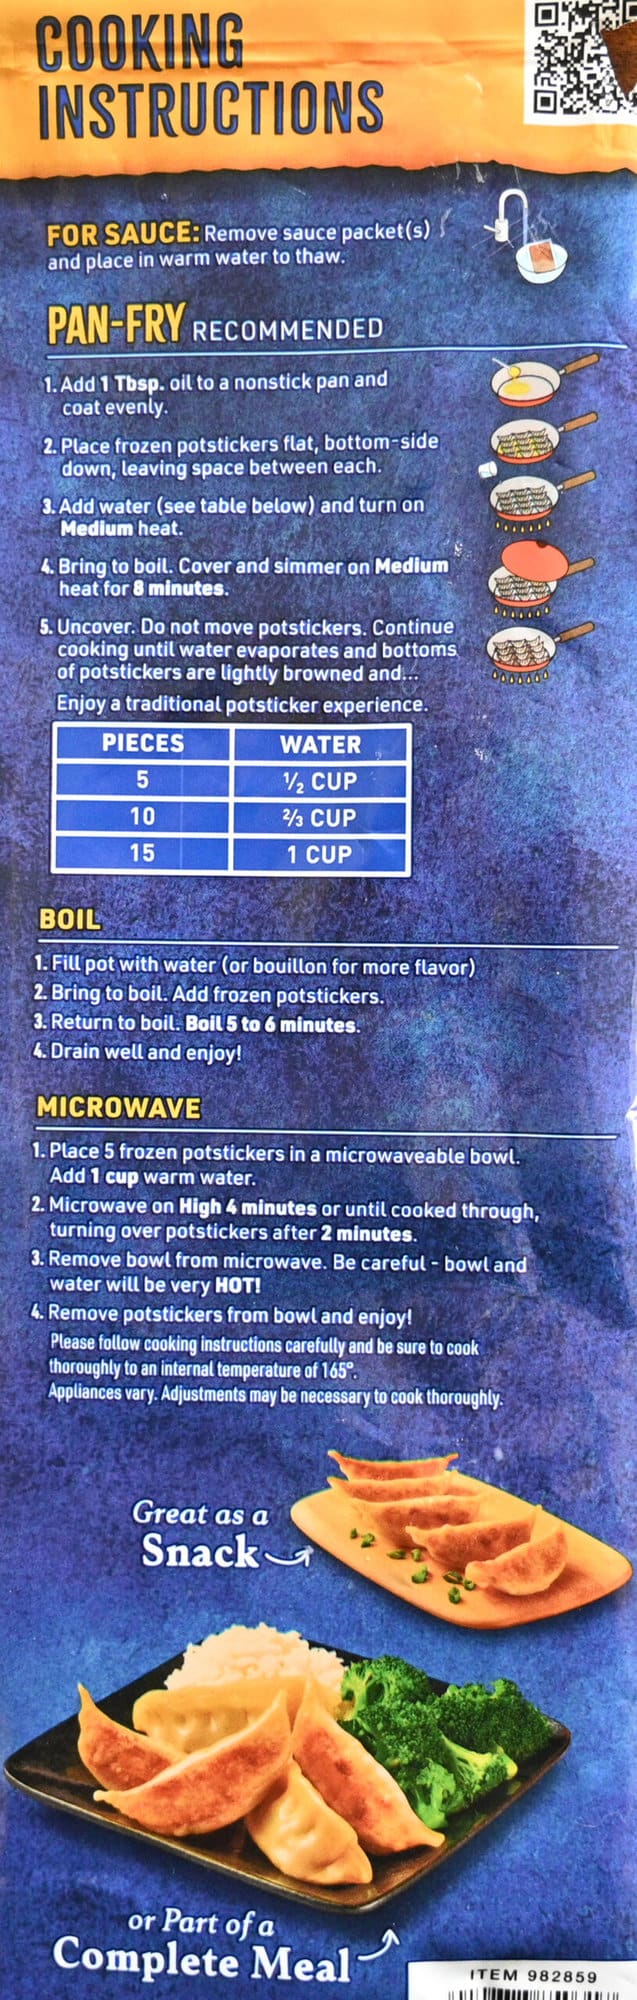 Image of the cooking instructions from the back of the bag.